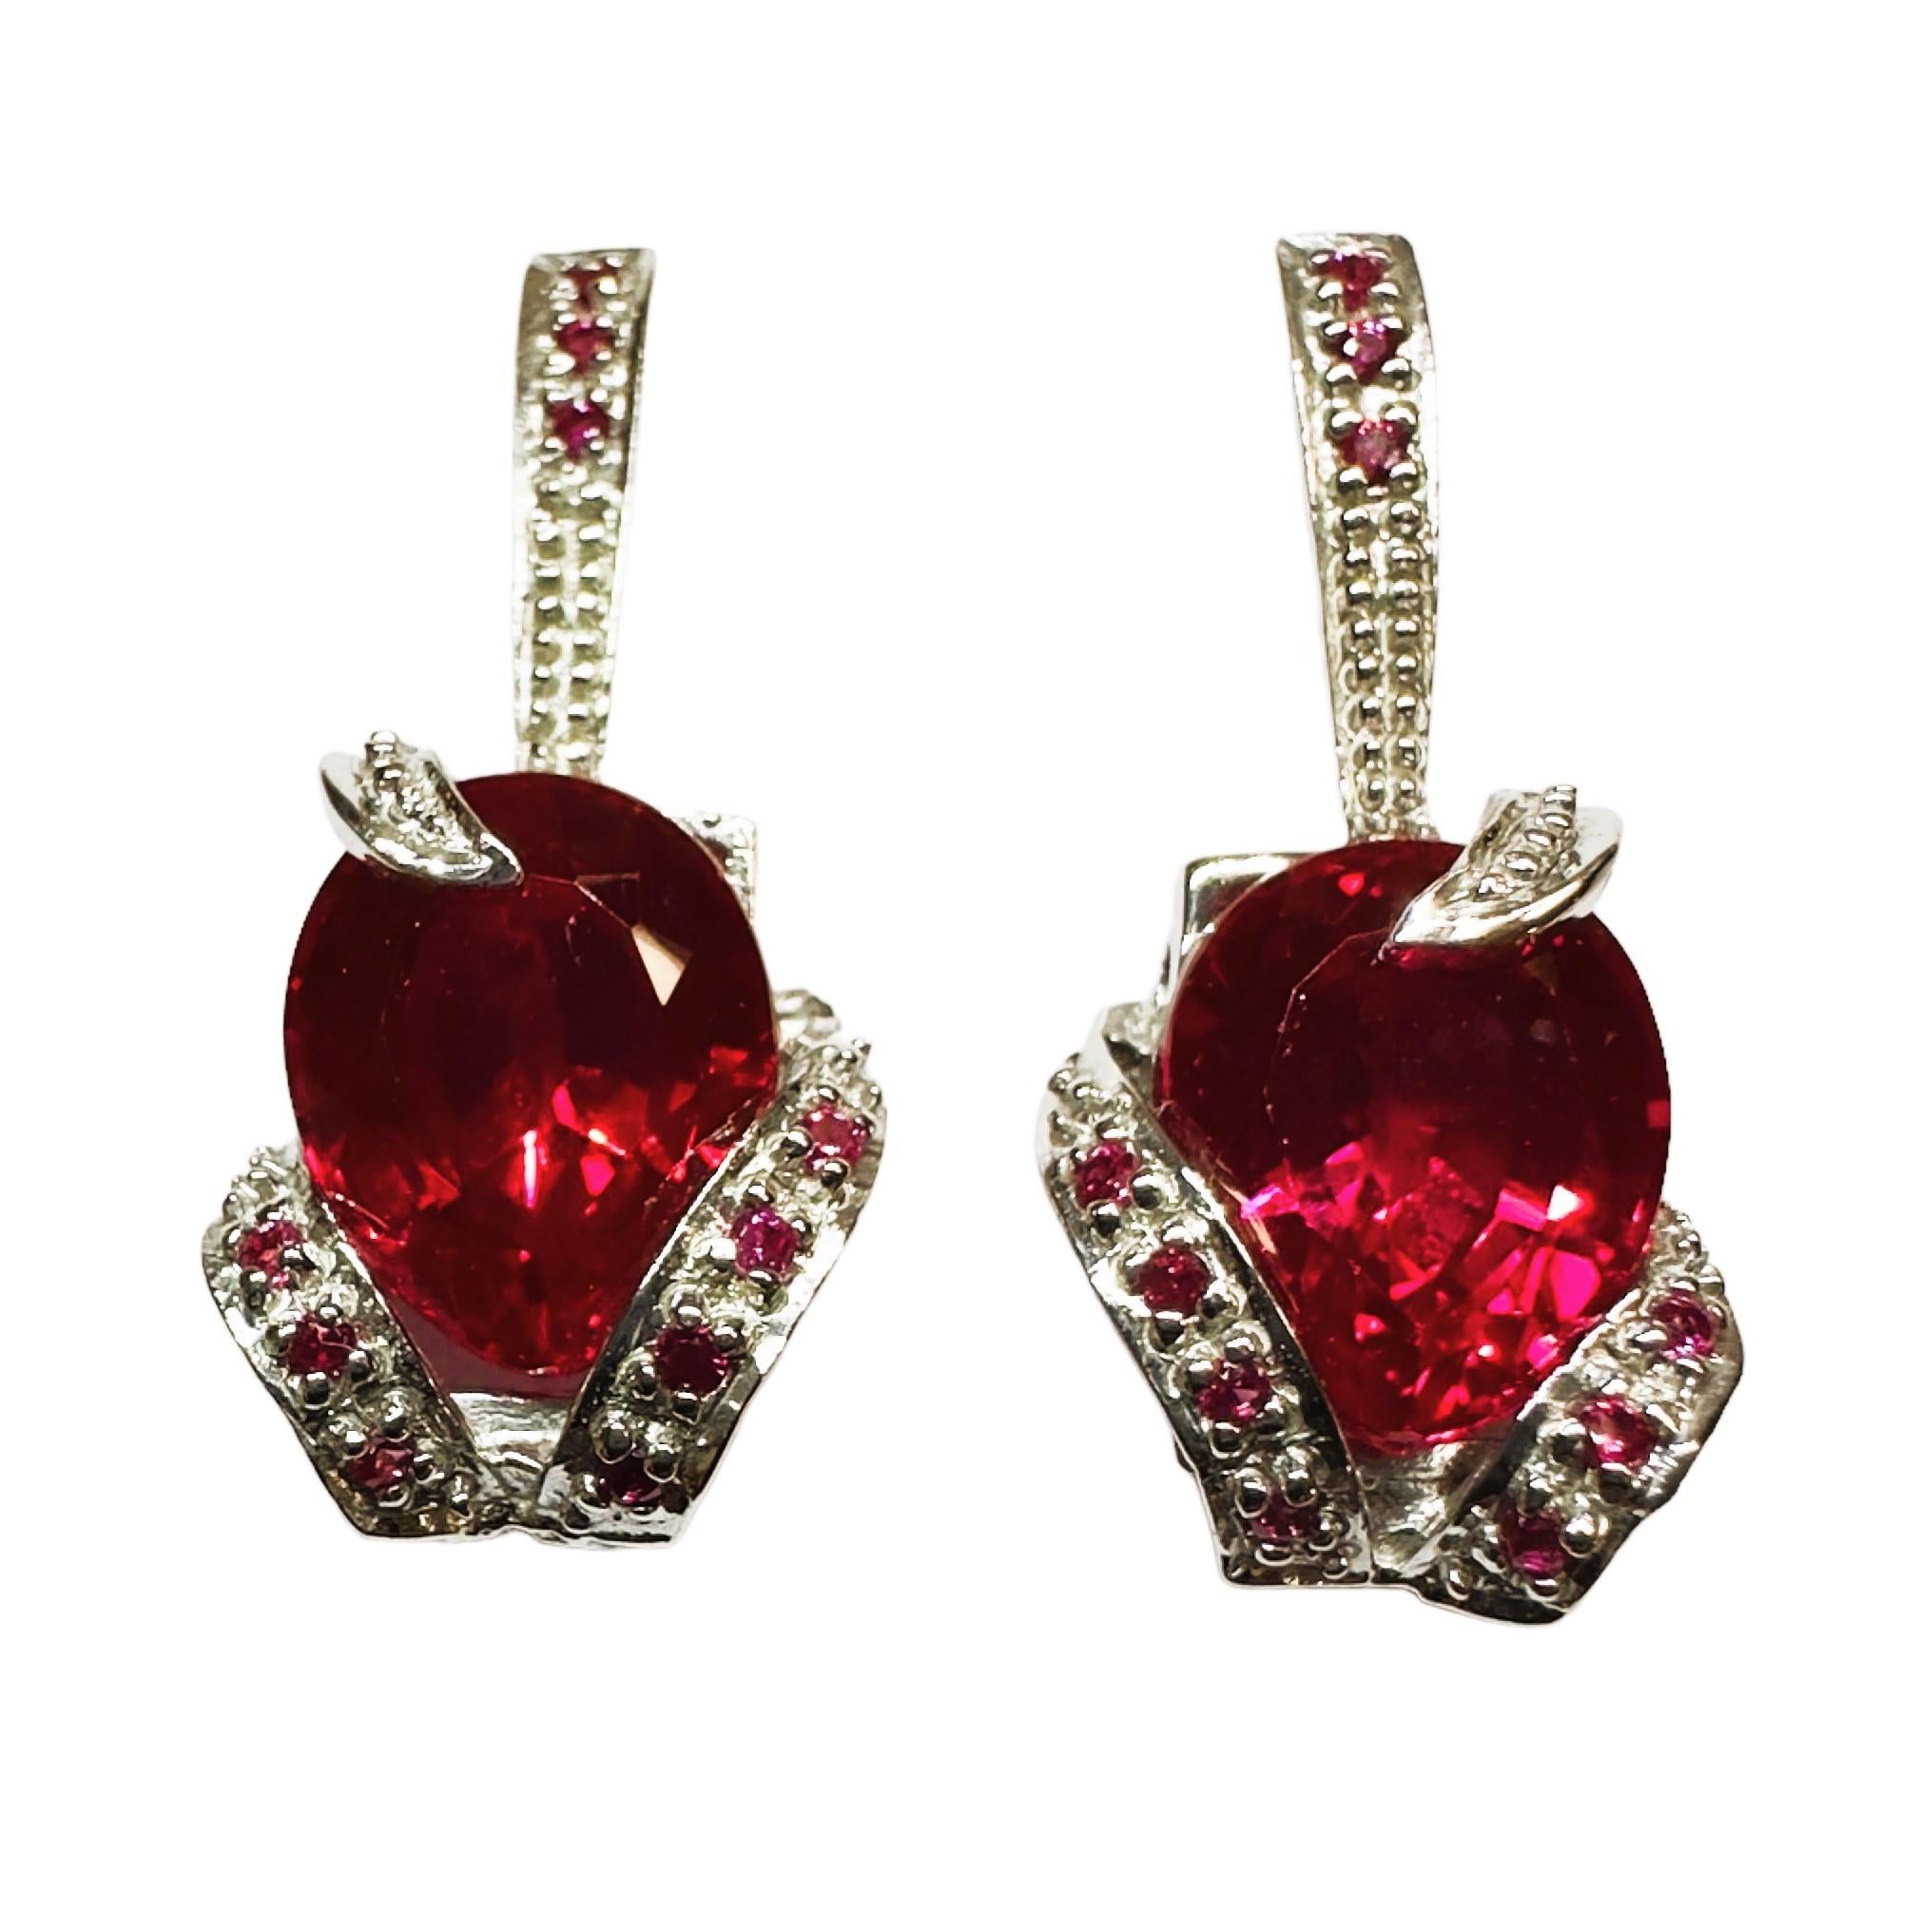 Oval Cut New African 9.70 Ct Pinkish Red Sapphire Sterling Earrings For Sale